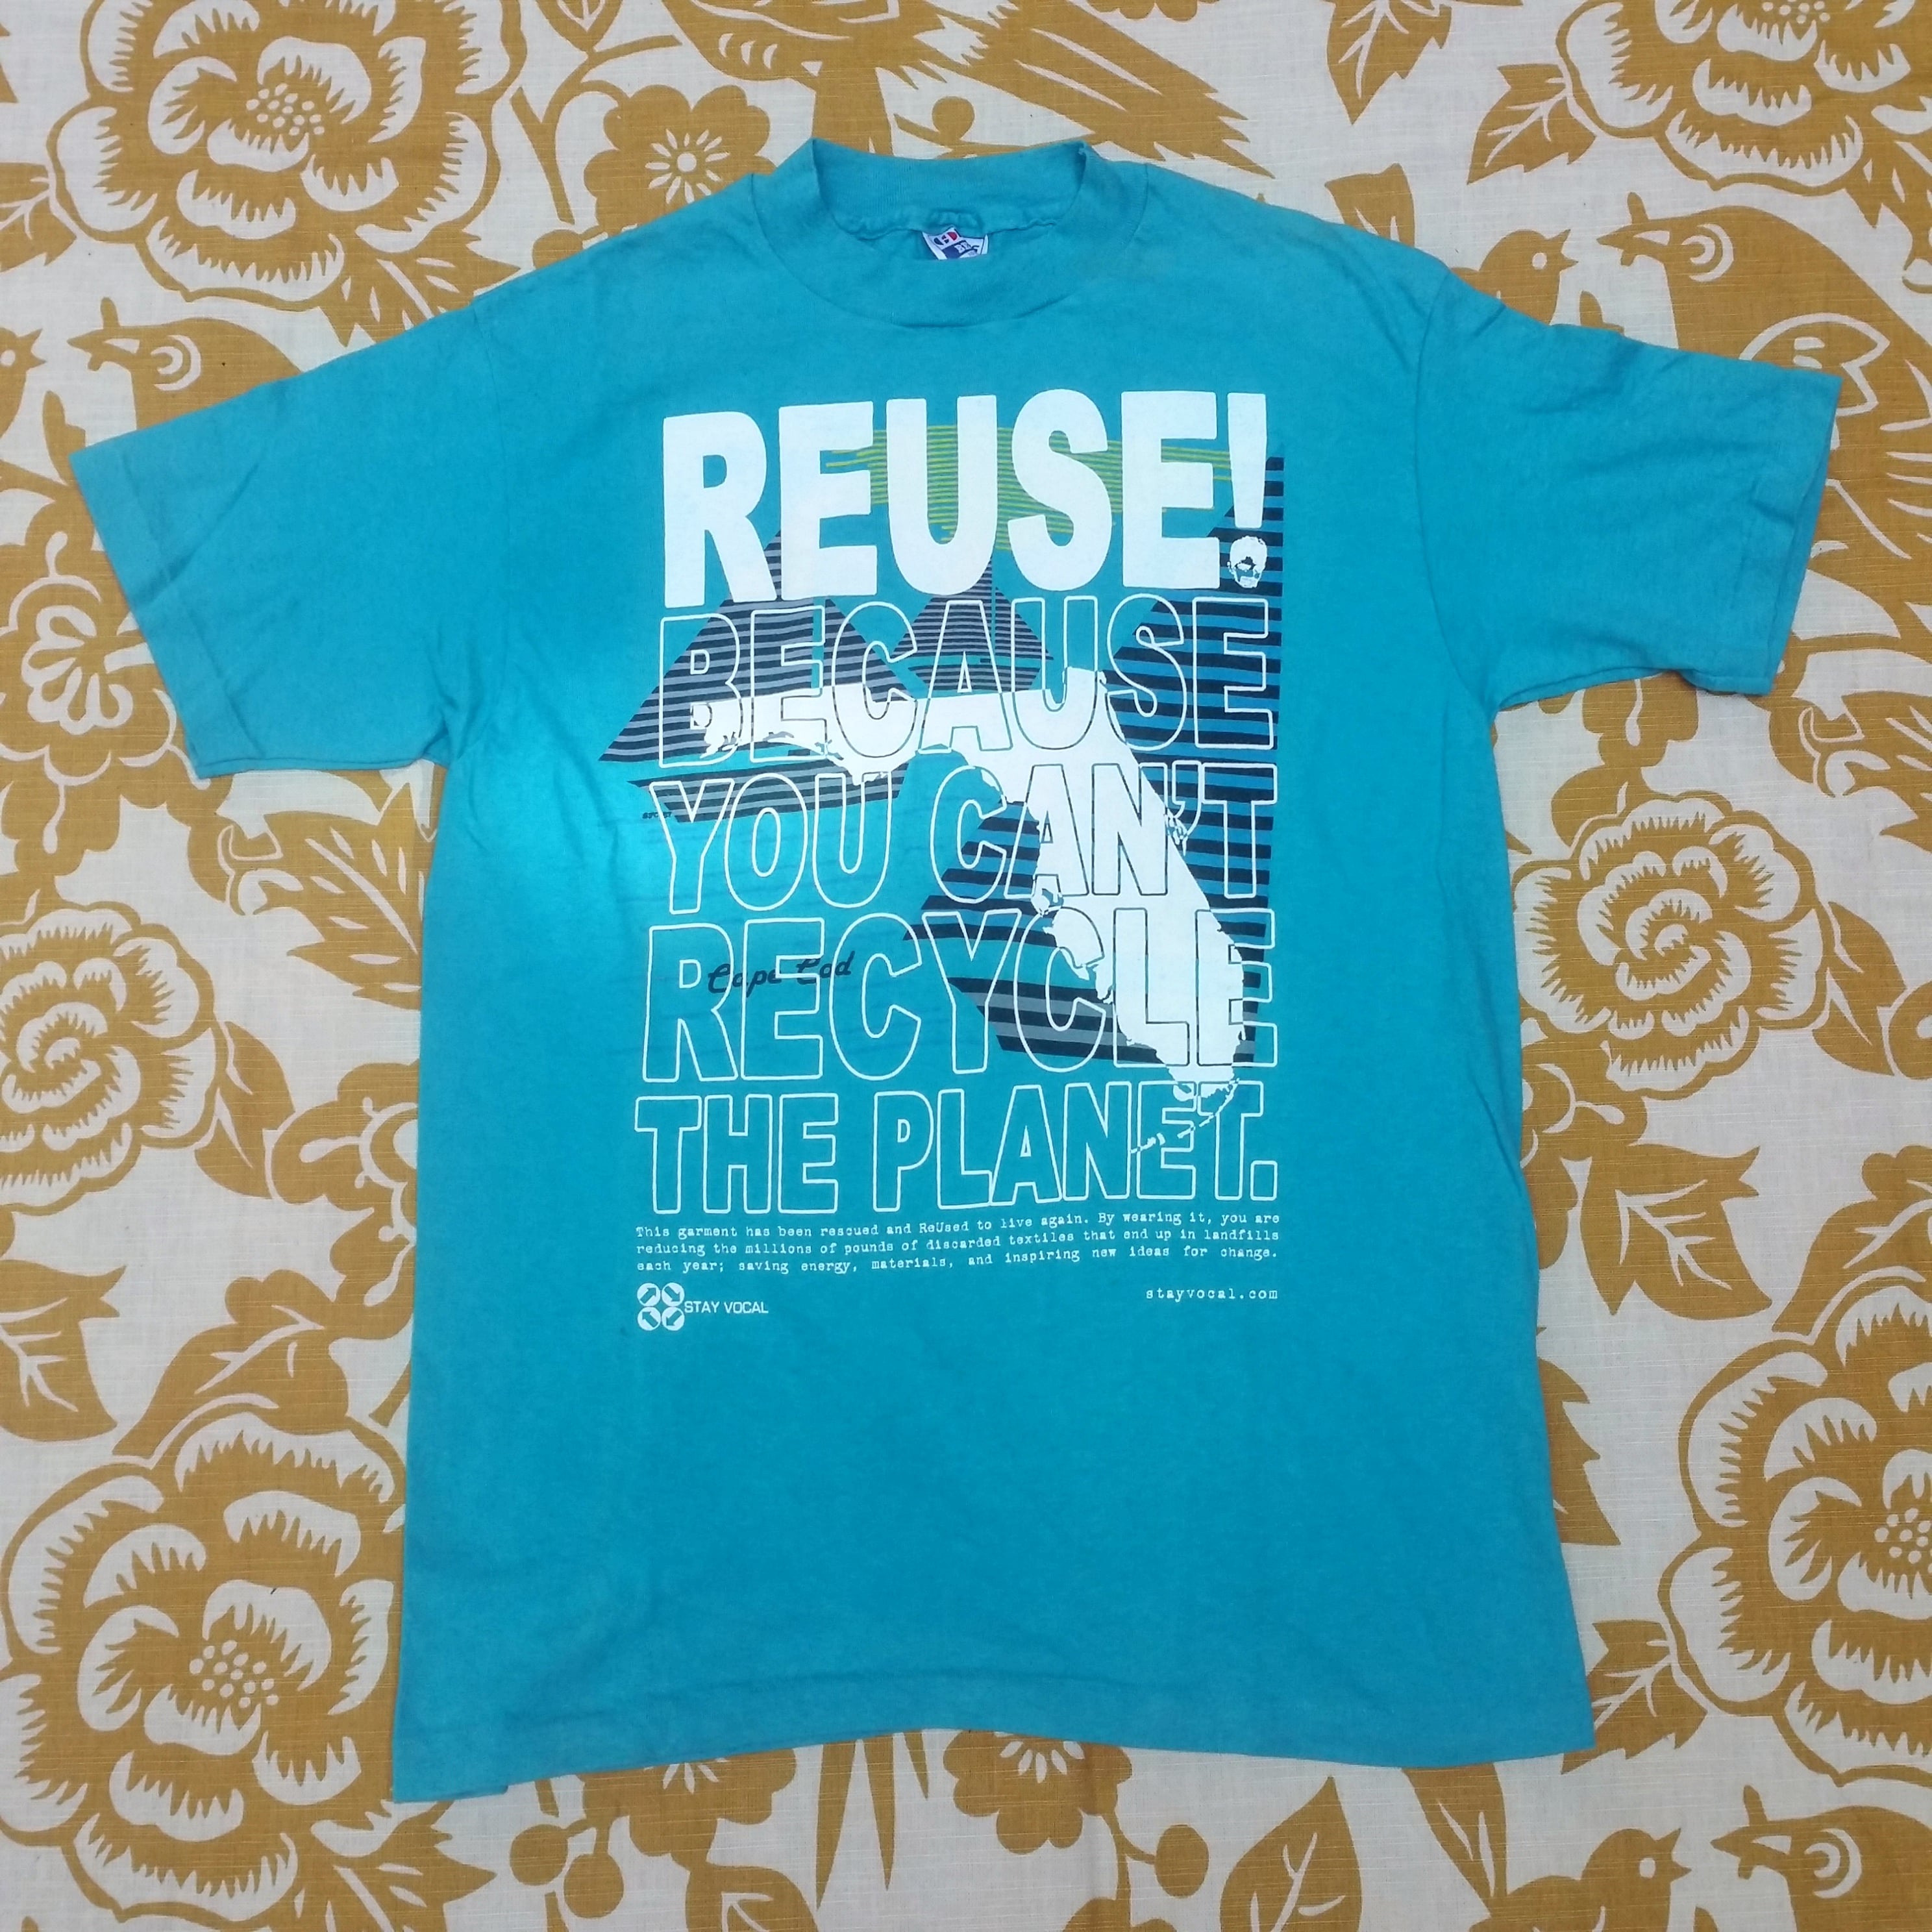 One of a Kind (Men's M) REUSE! Sailing from Florida to Cape Cod T-Shirt